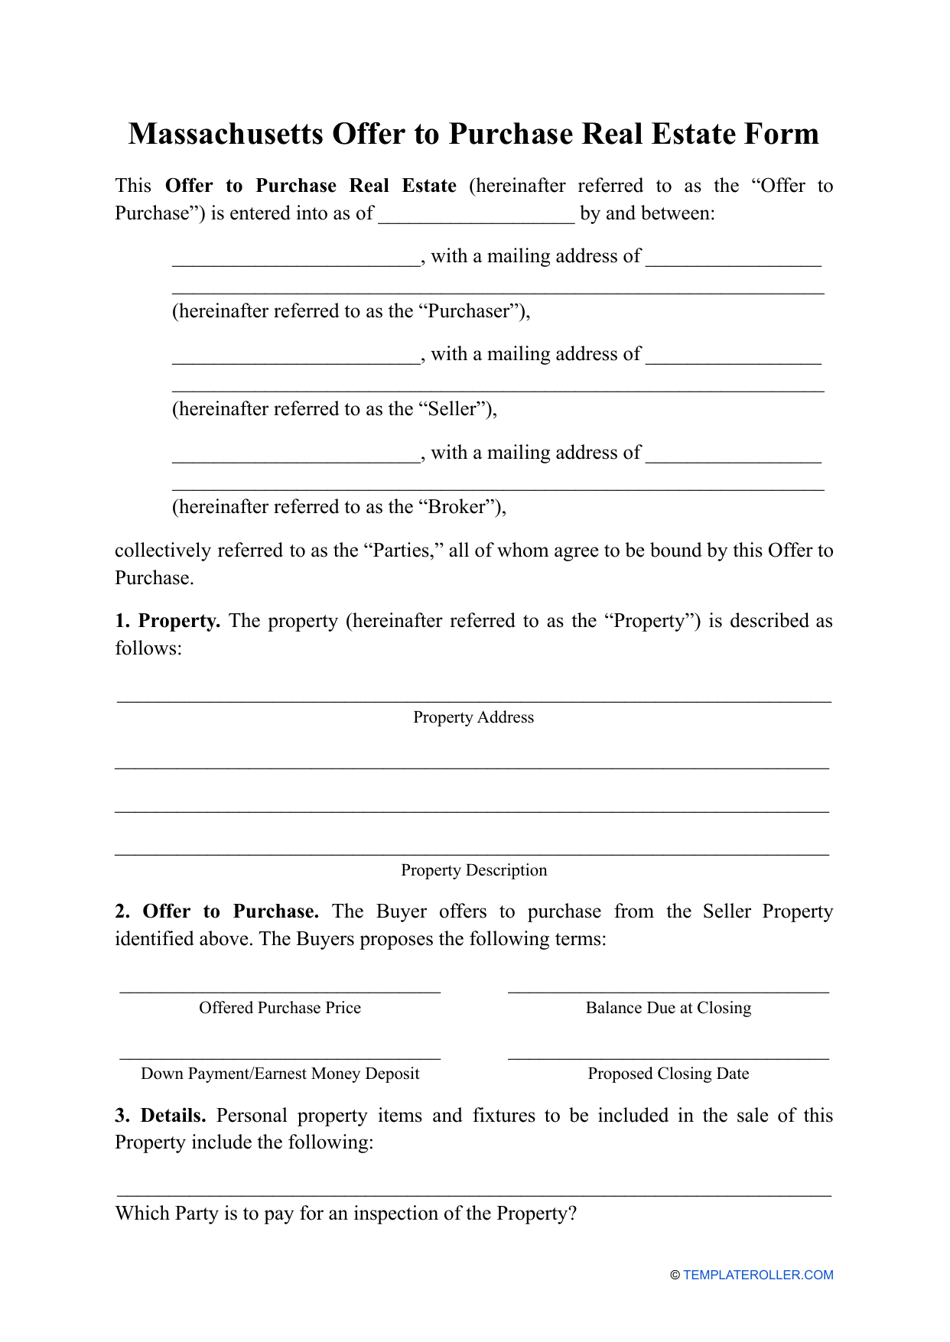 Offer to Purchase Real Estate Form - Massachusetts, Page 1